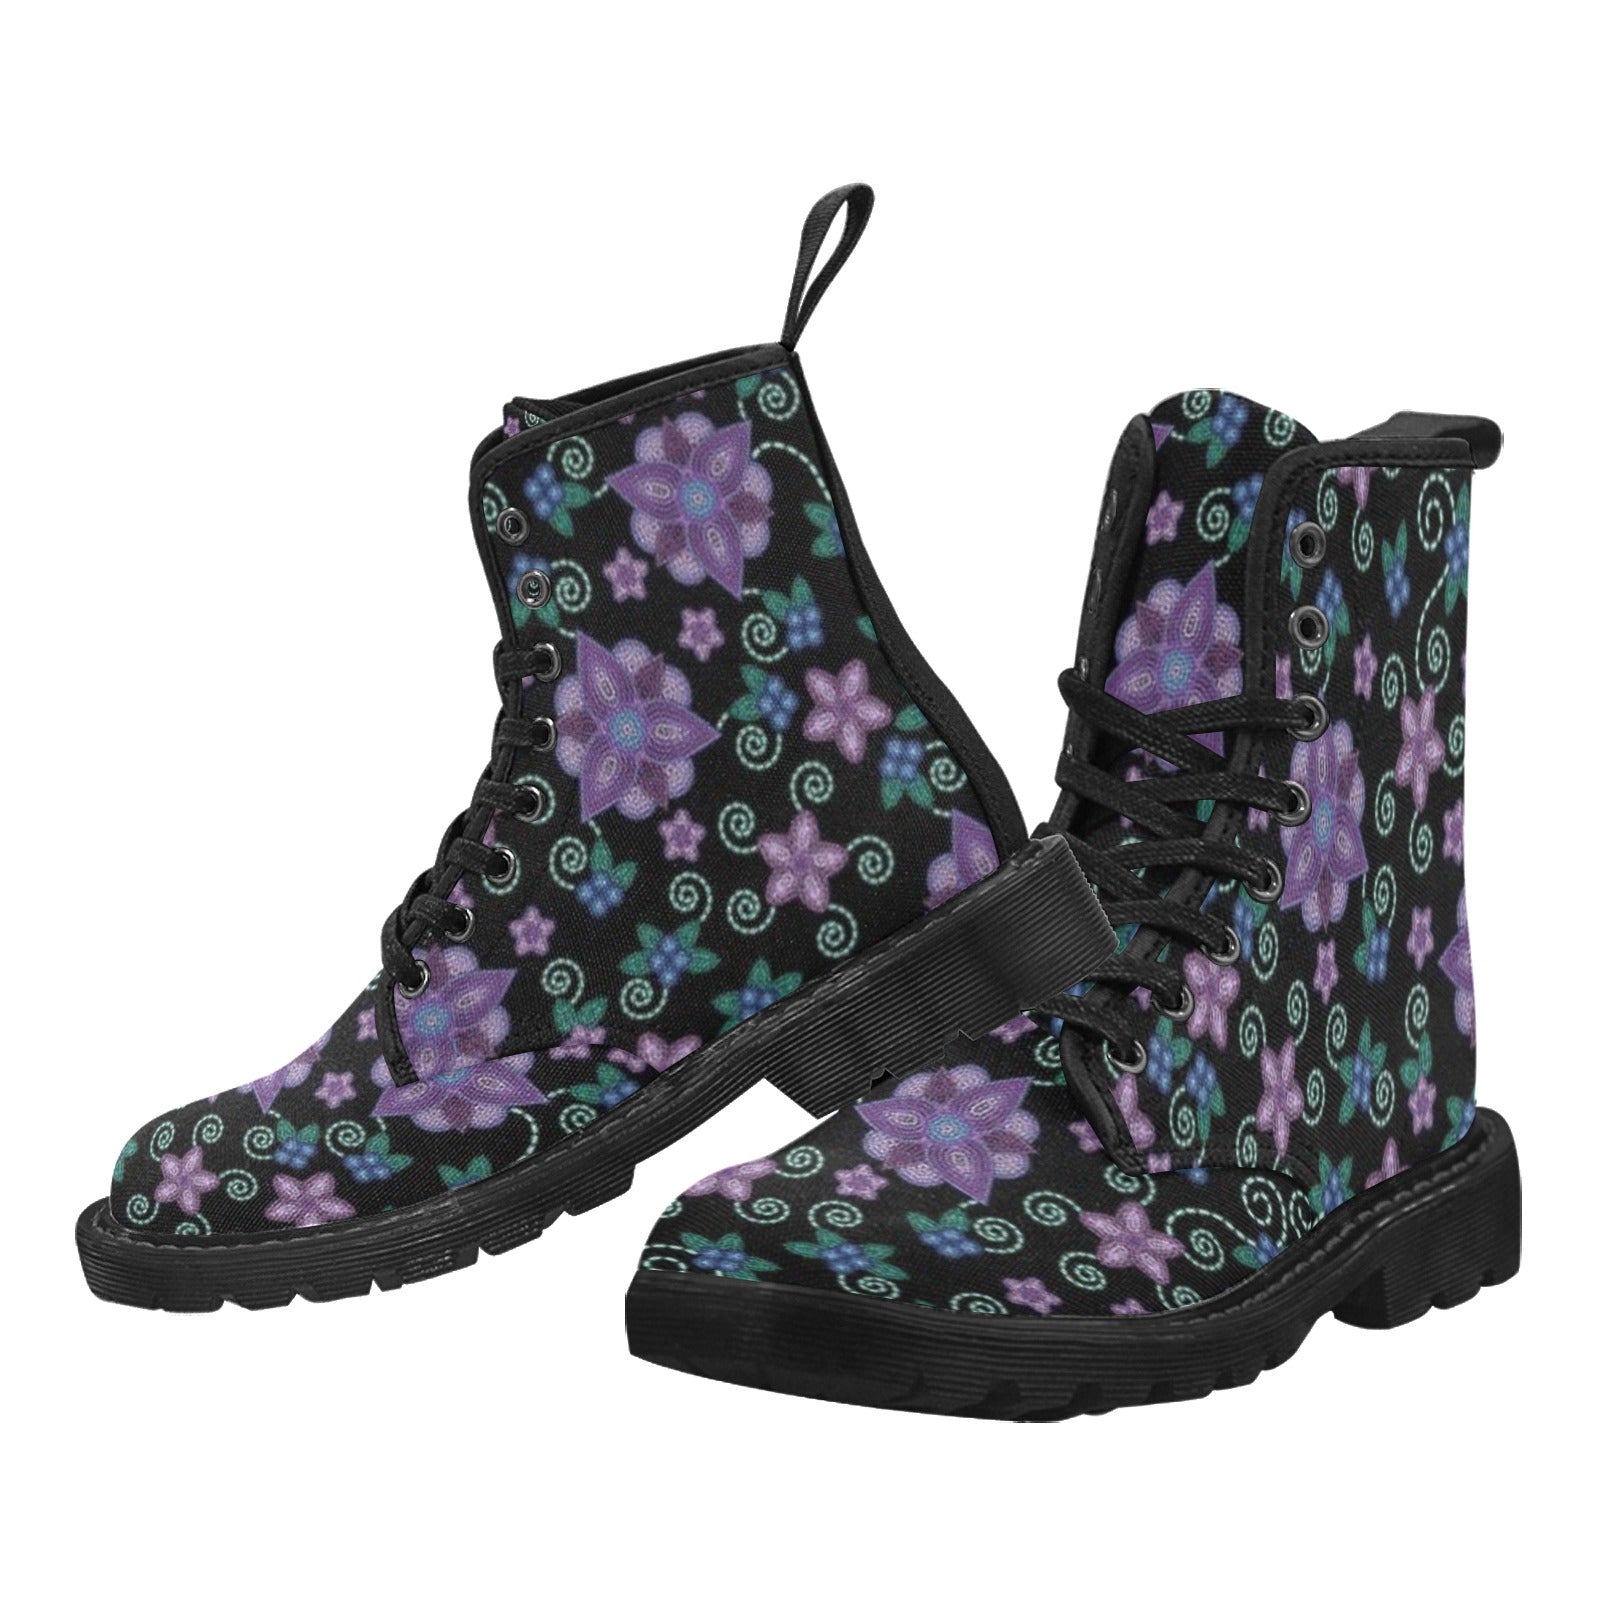 Berry Picking Boots for Women (Black)